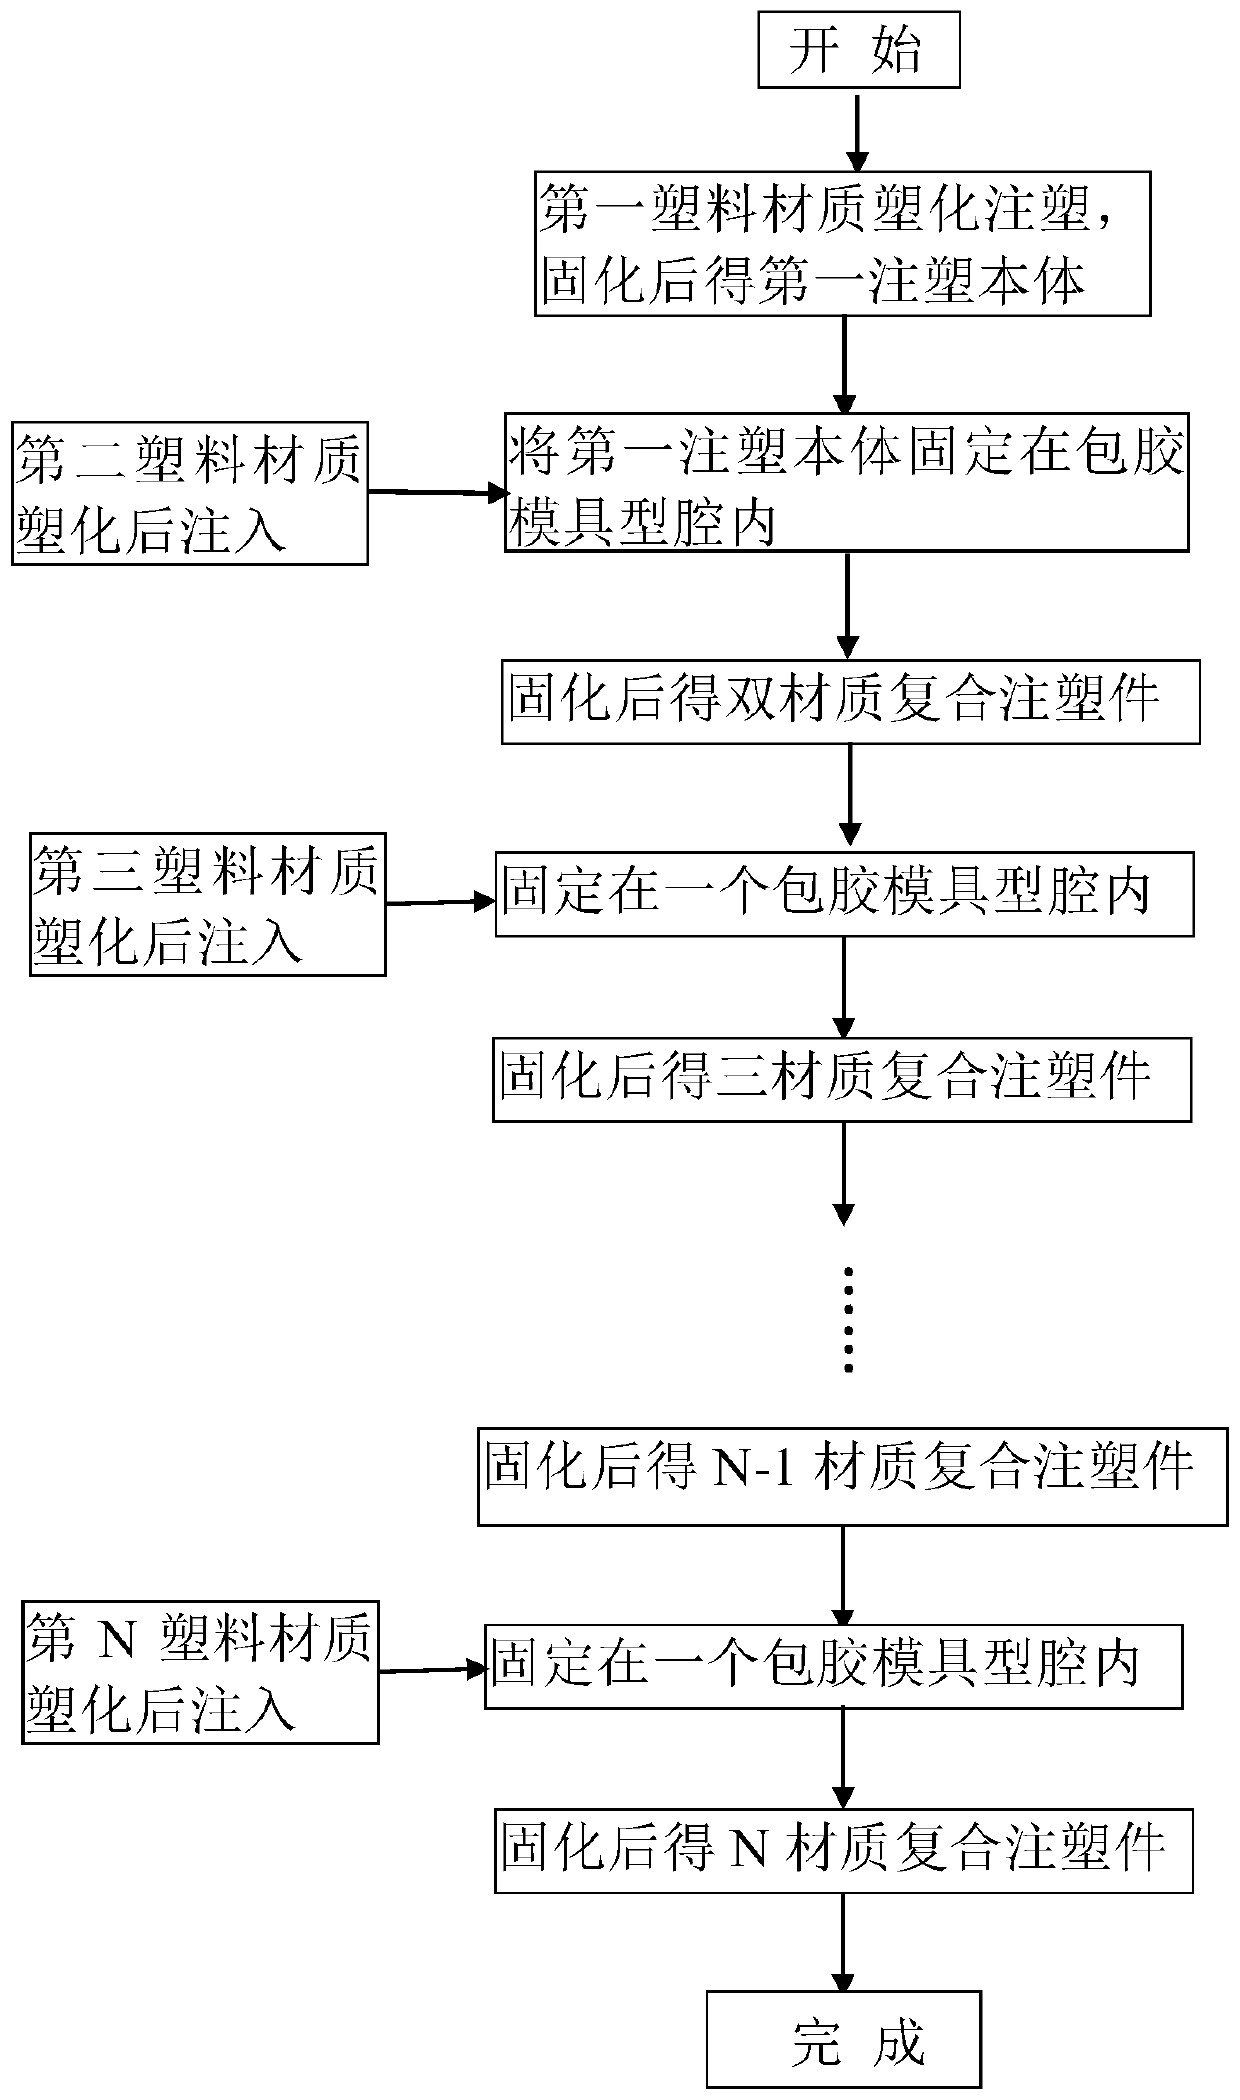 Multi-color multi-material injection molding method